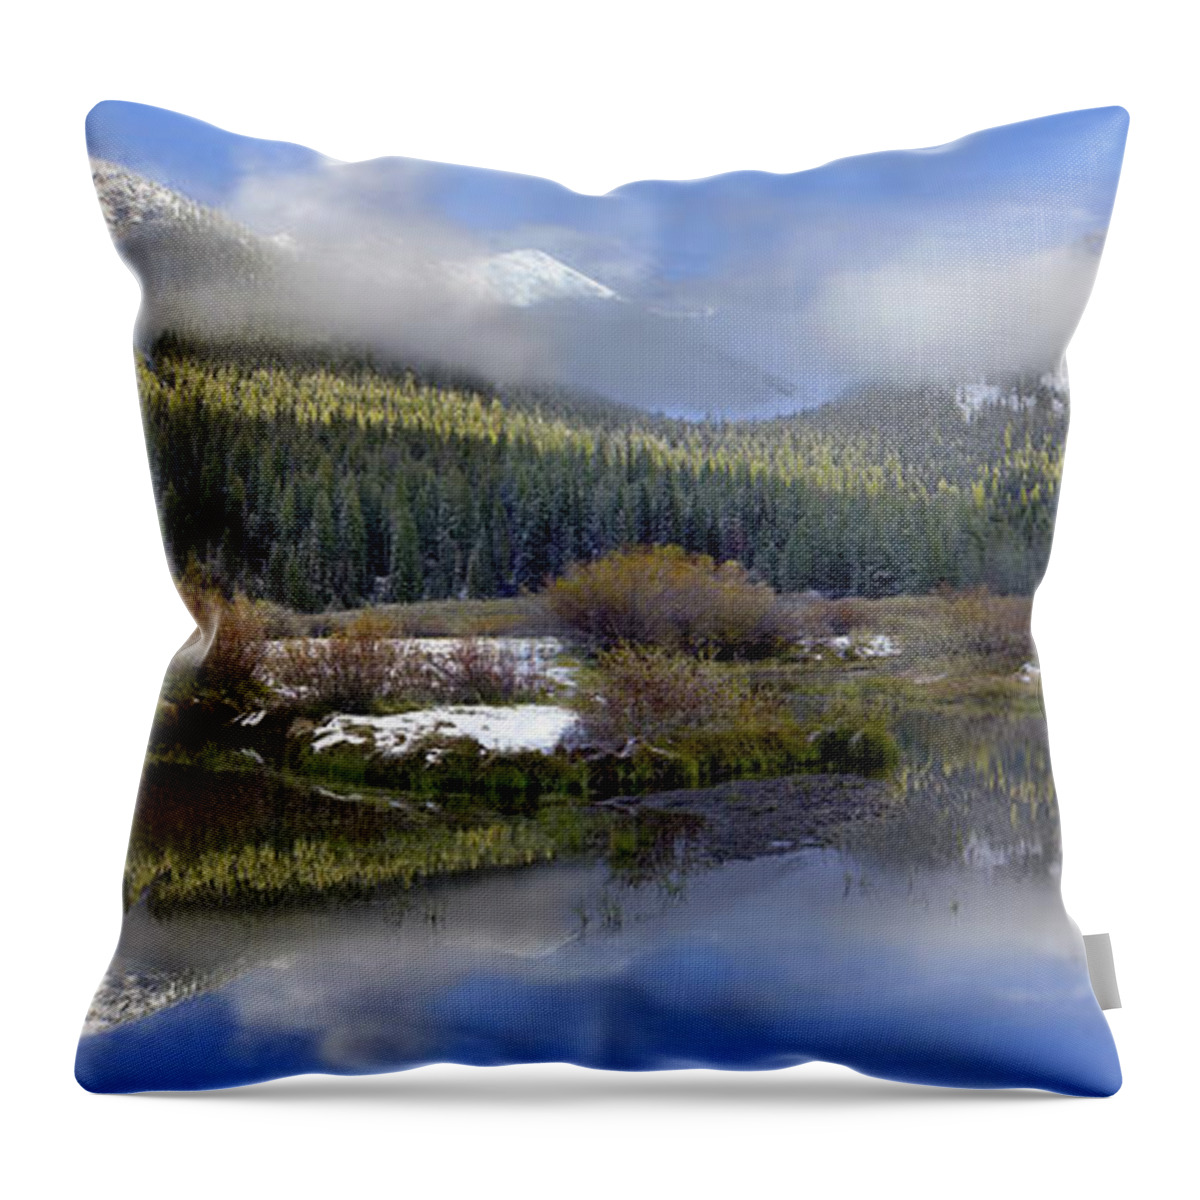 00175165 Throw Pillow featuring the photograph Panoramic View Of The Pioneer Mountains by Tim Fitzharris